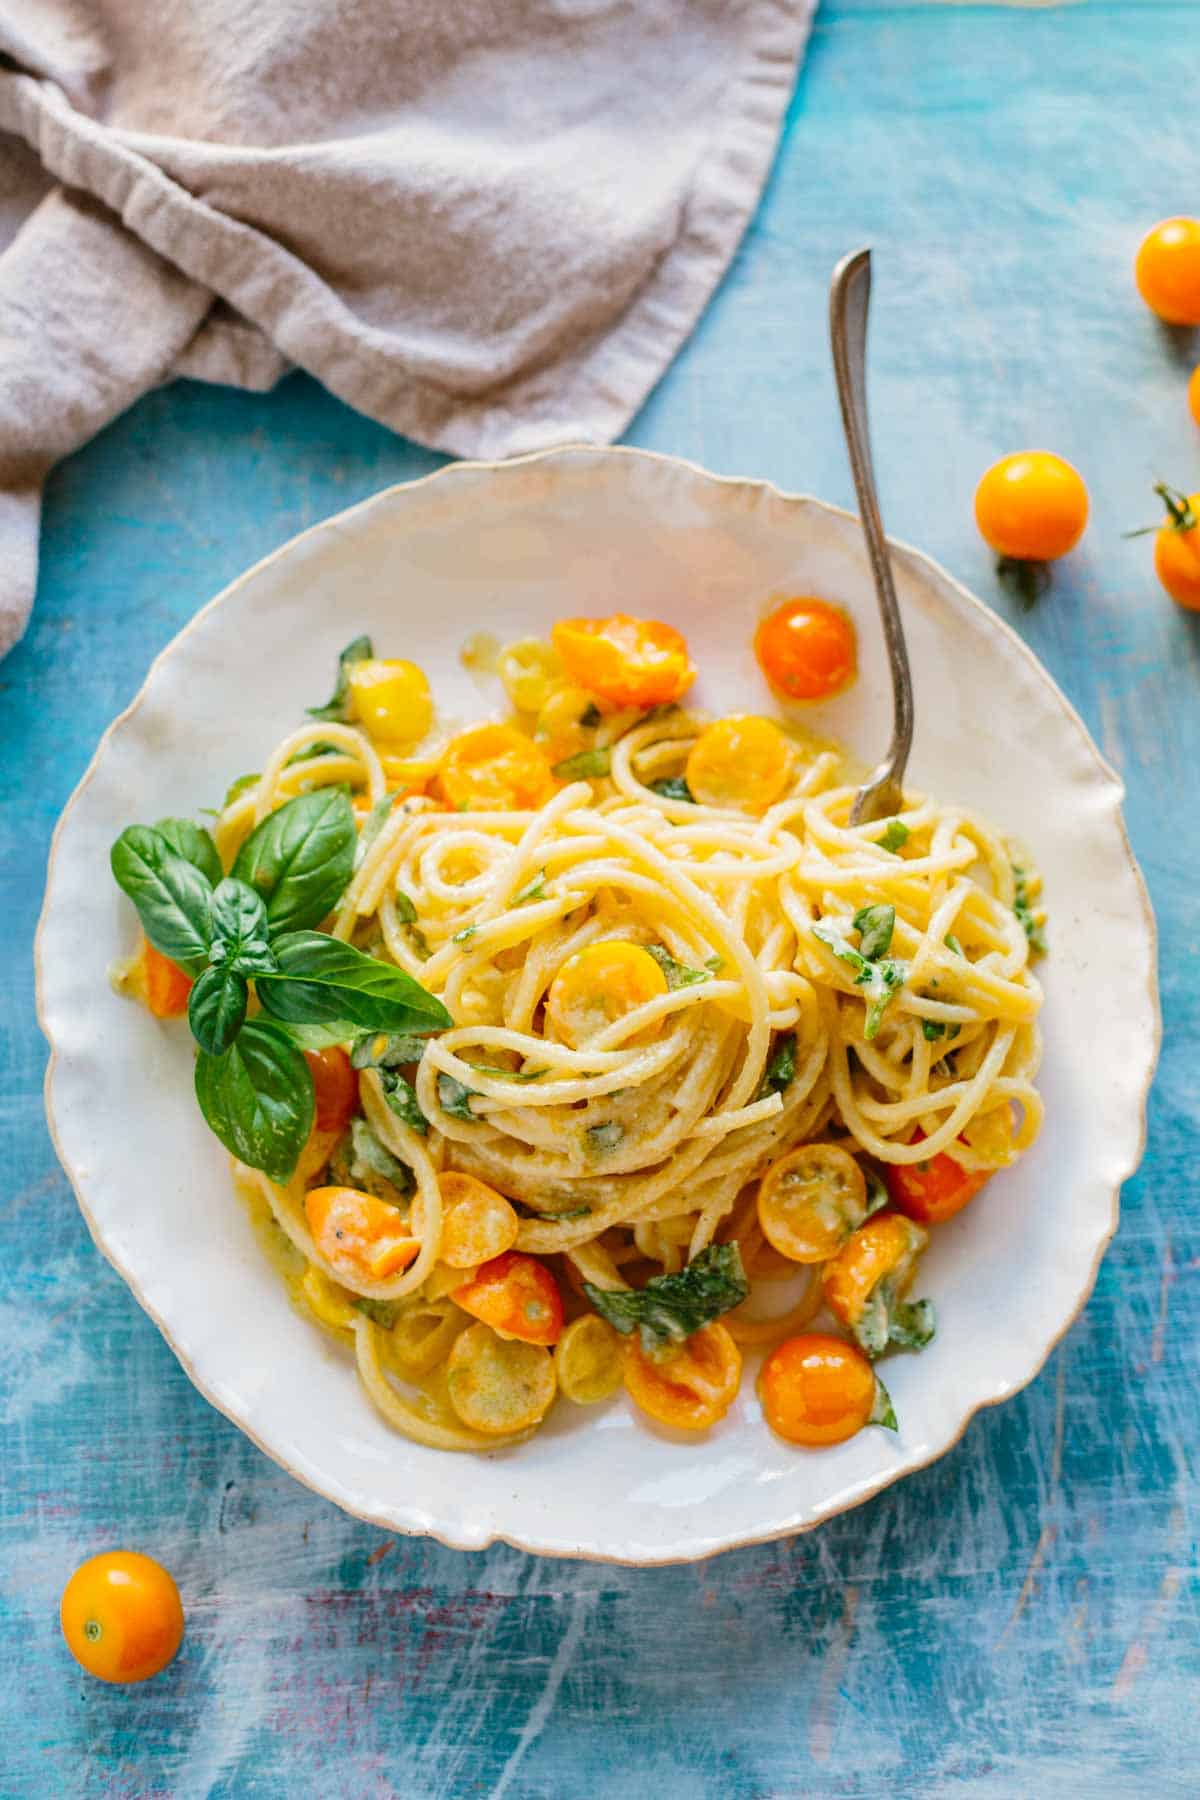 Overhead shot of a bowl of pasta with orange tomatoes, basil and a fork.